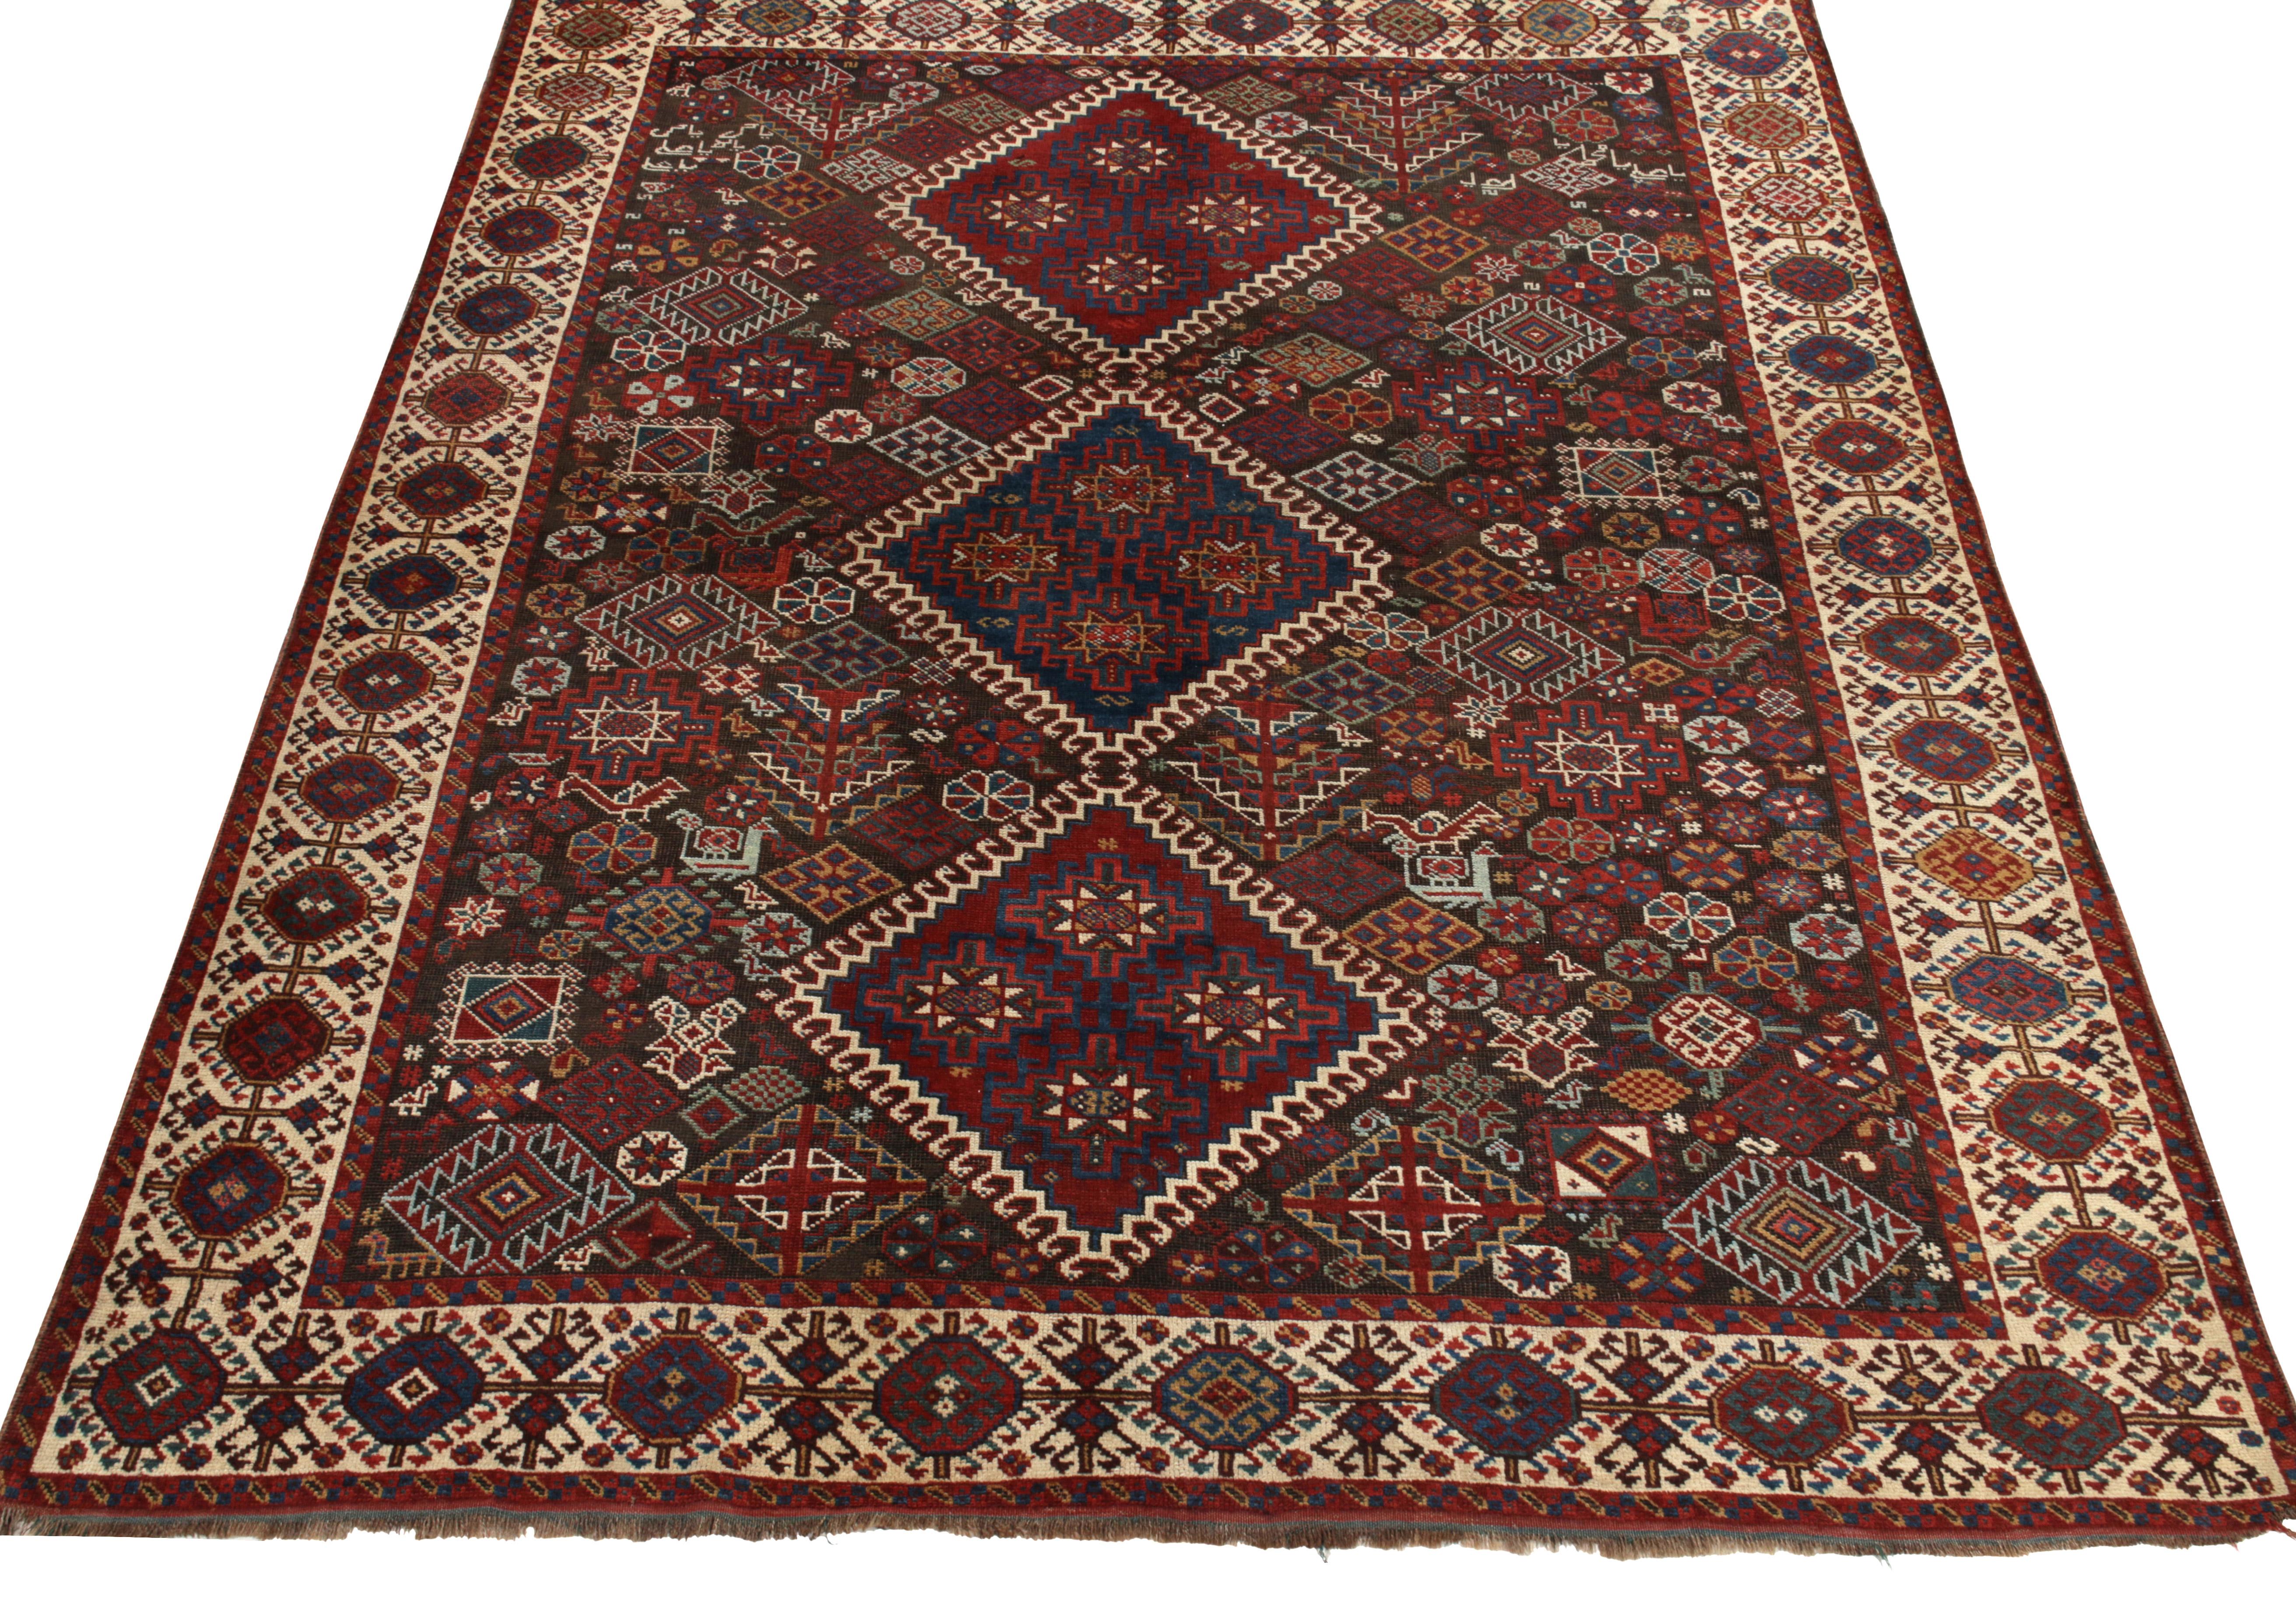 Hand-knotted in smooth, suede-like wool, an antique Qashqai rug originating circa 1920-1930, joining Rug & Kilim’s coveted Antique & Vintage collection. Celebrating fine aesthetics of a reputed Iranian workshop, the 6x8 collectible features diamond